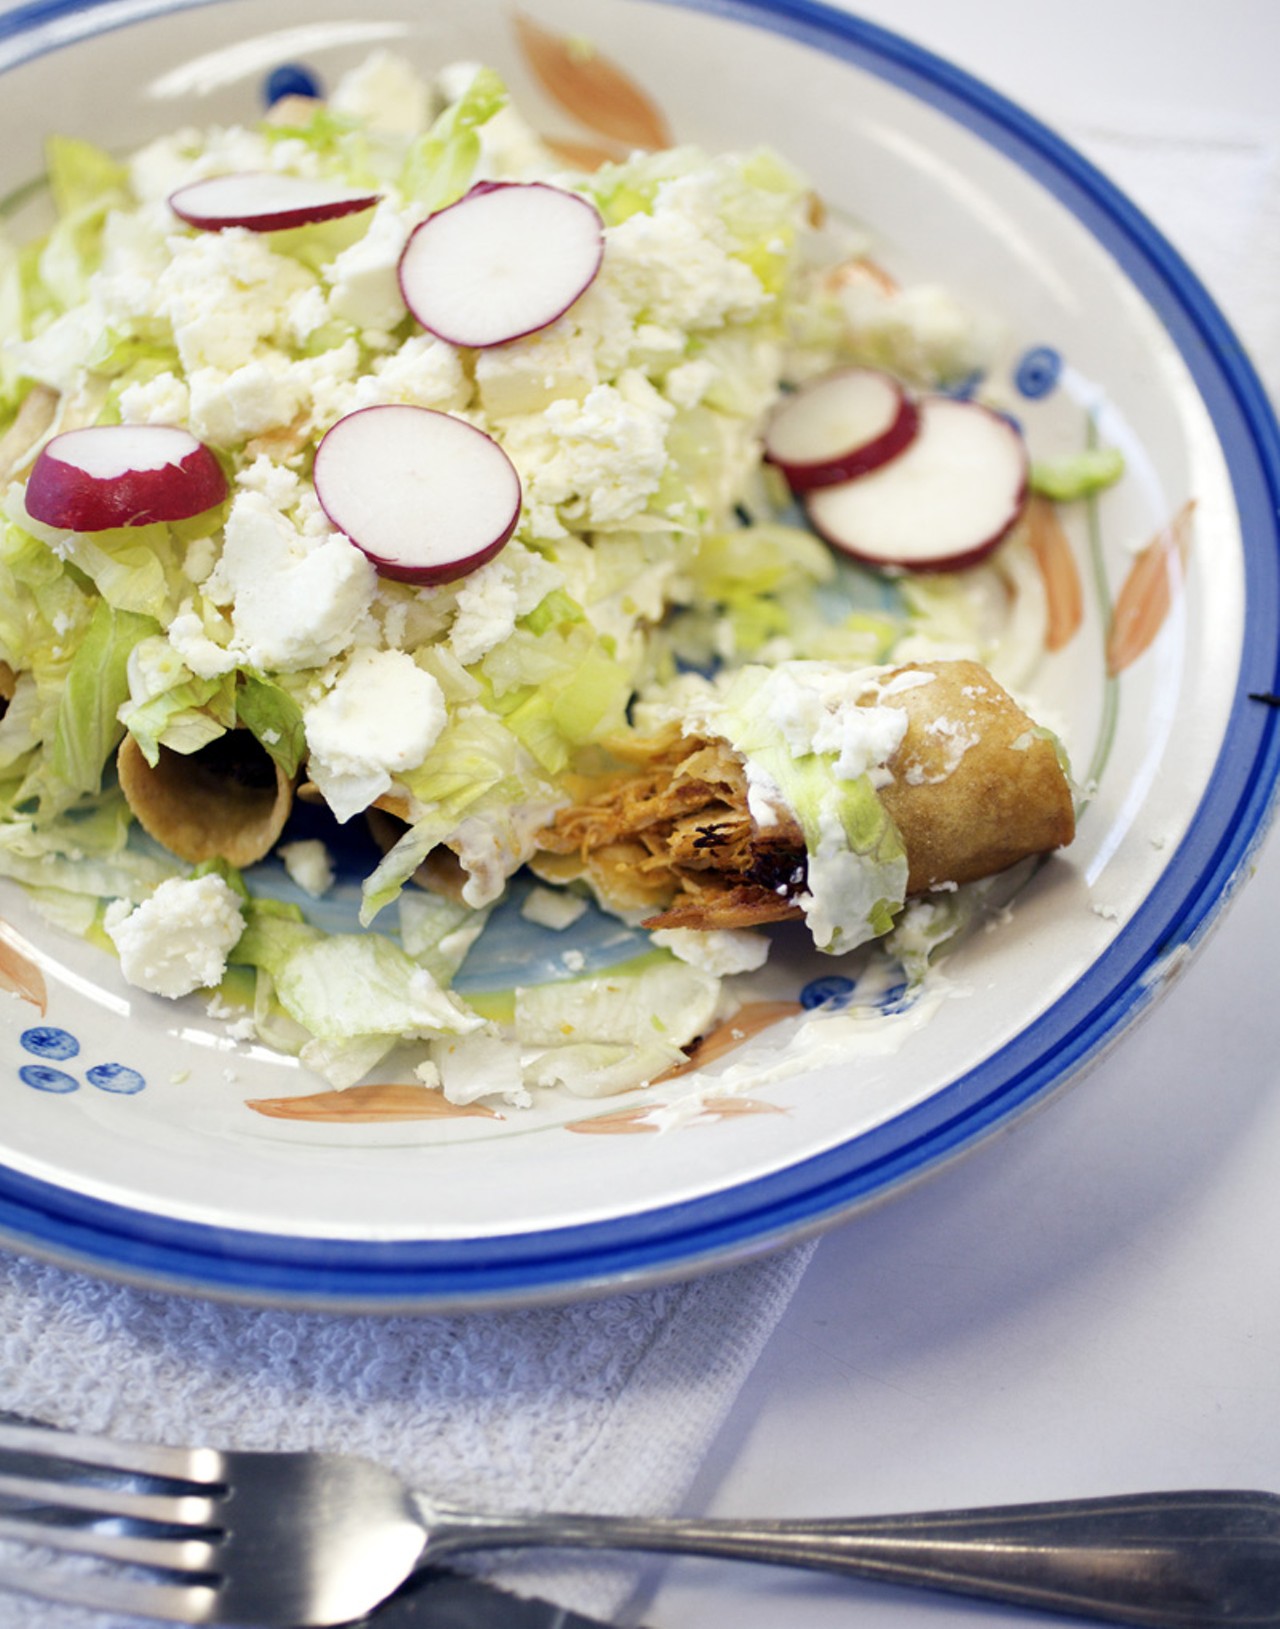 The Flautas are made with corn tortillas and your choice of meat. Here it has been prepared with chicken, and is served with lettuce, queso fresco and radishes.